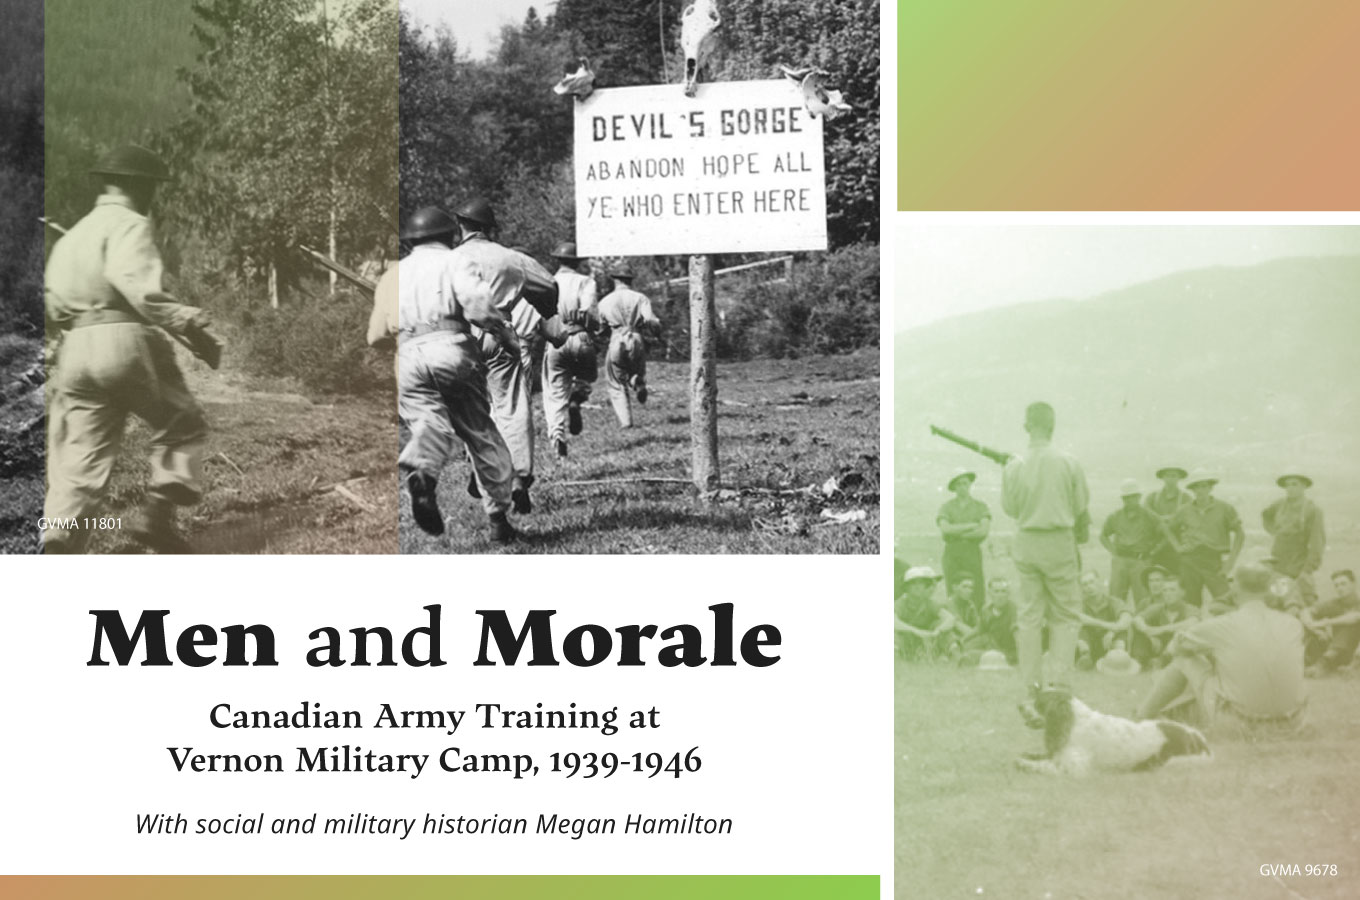 Men and Morale: Canadian Army Training at Vernon Military Camp, 1939-1946